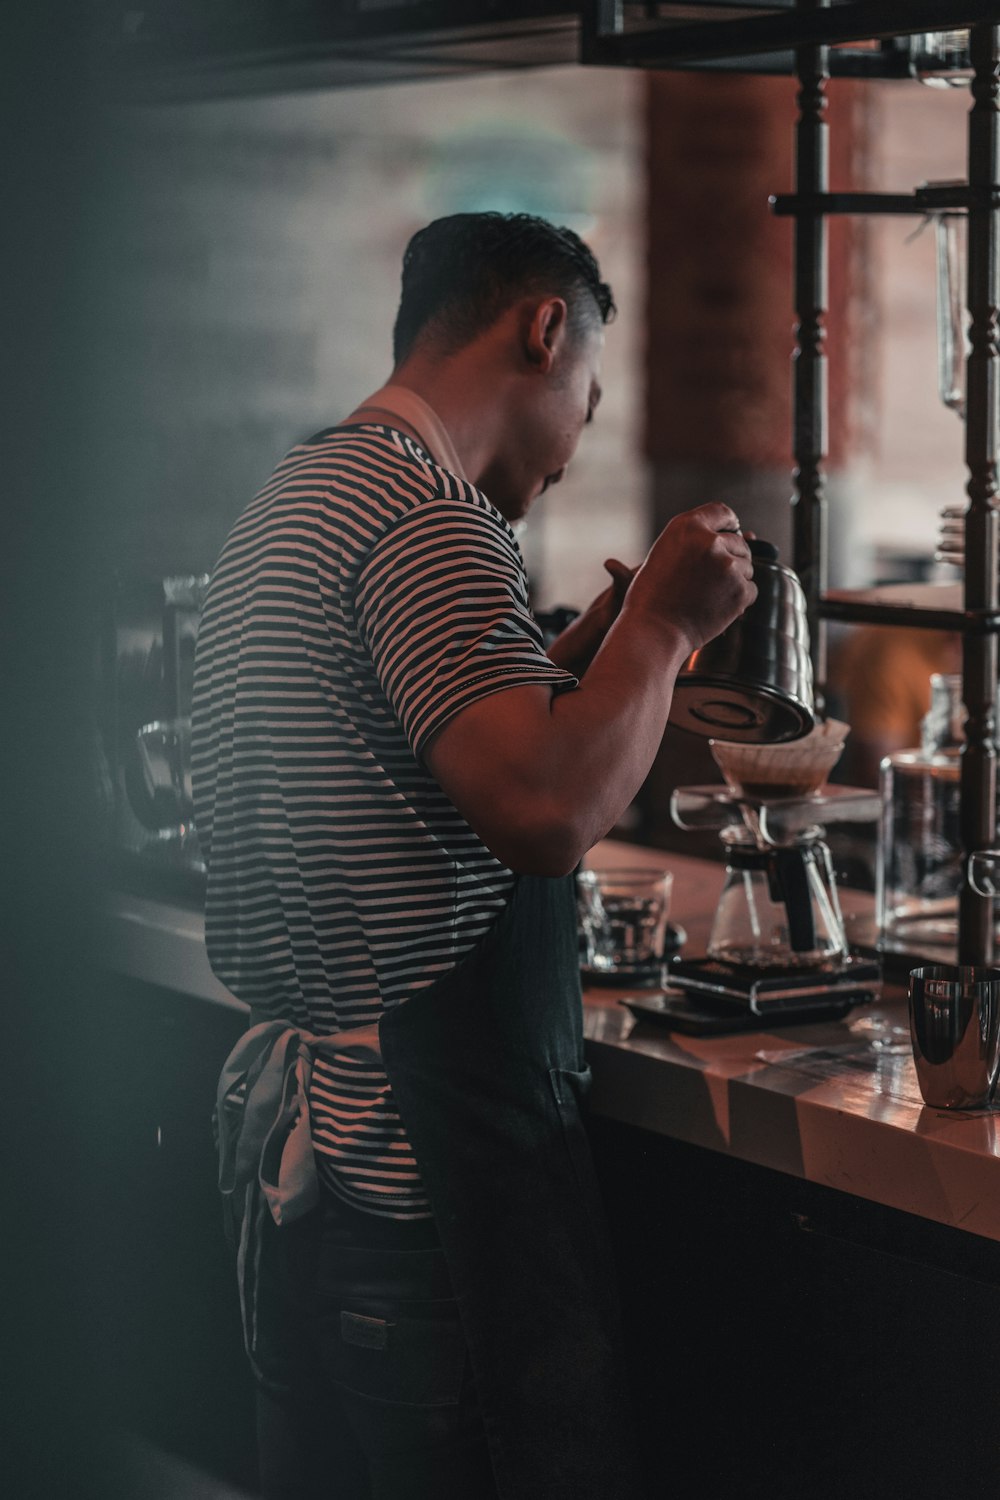 man pouring beverage on coffee carafe